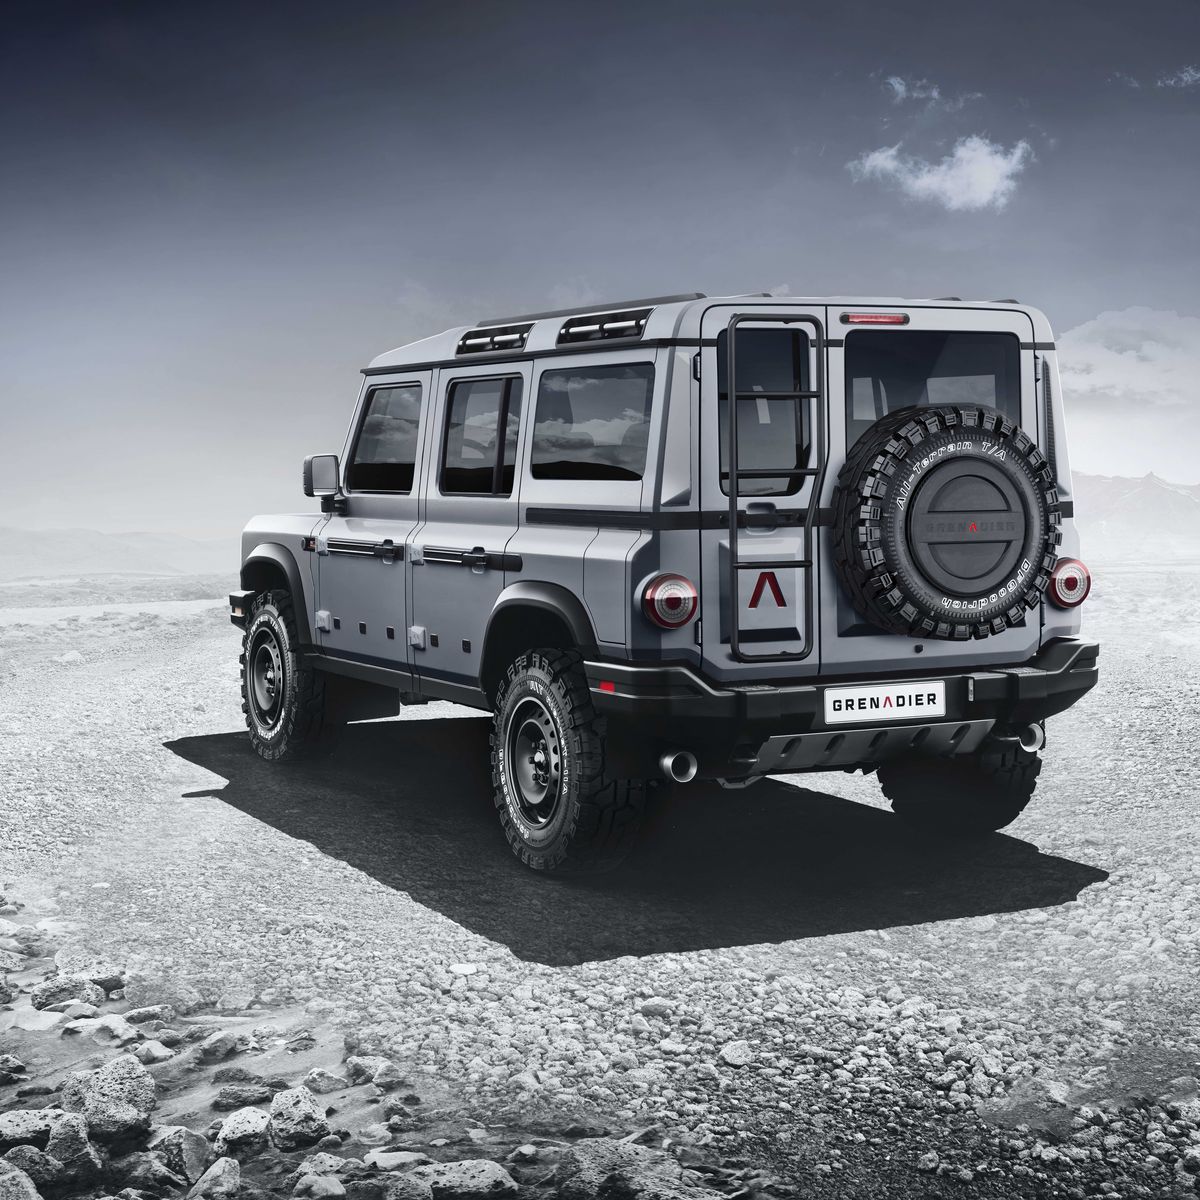 Ineos Grenadier Is a New BMW-Powered Off-Roader With Familiar Looks